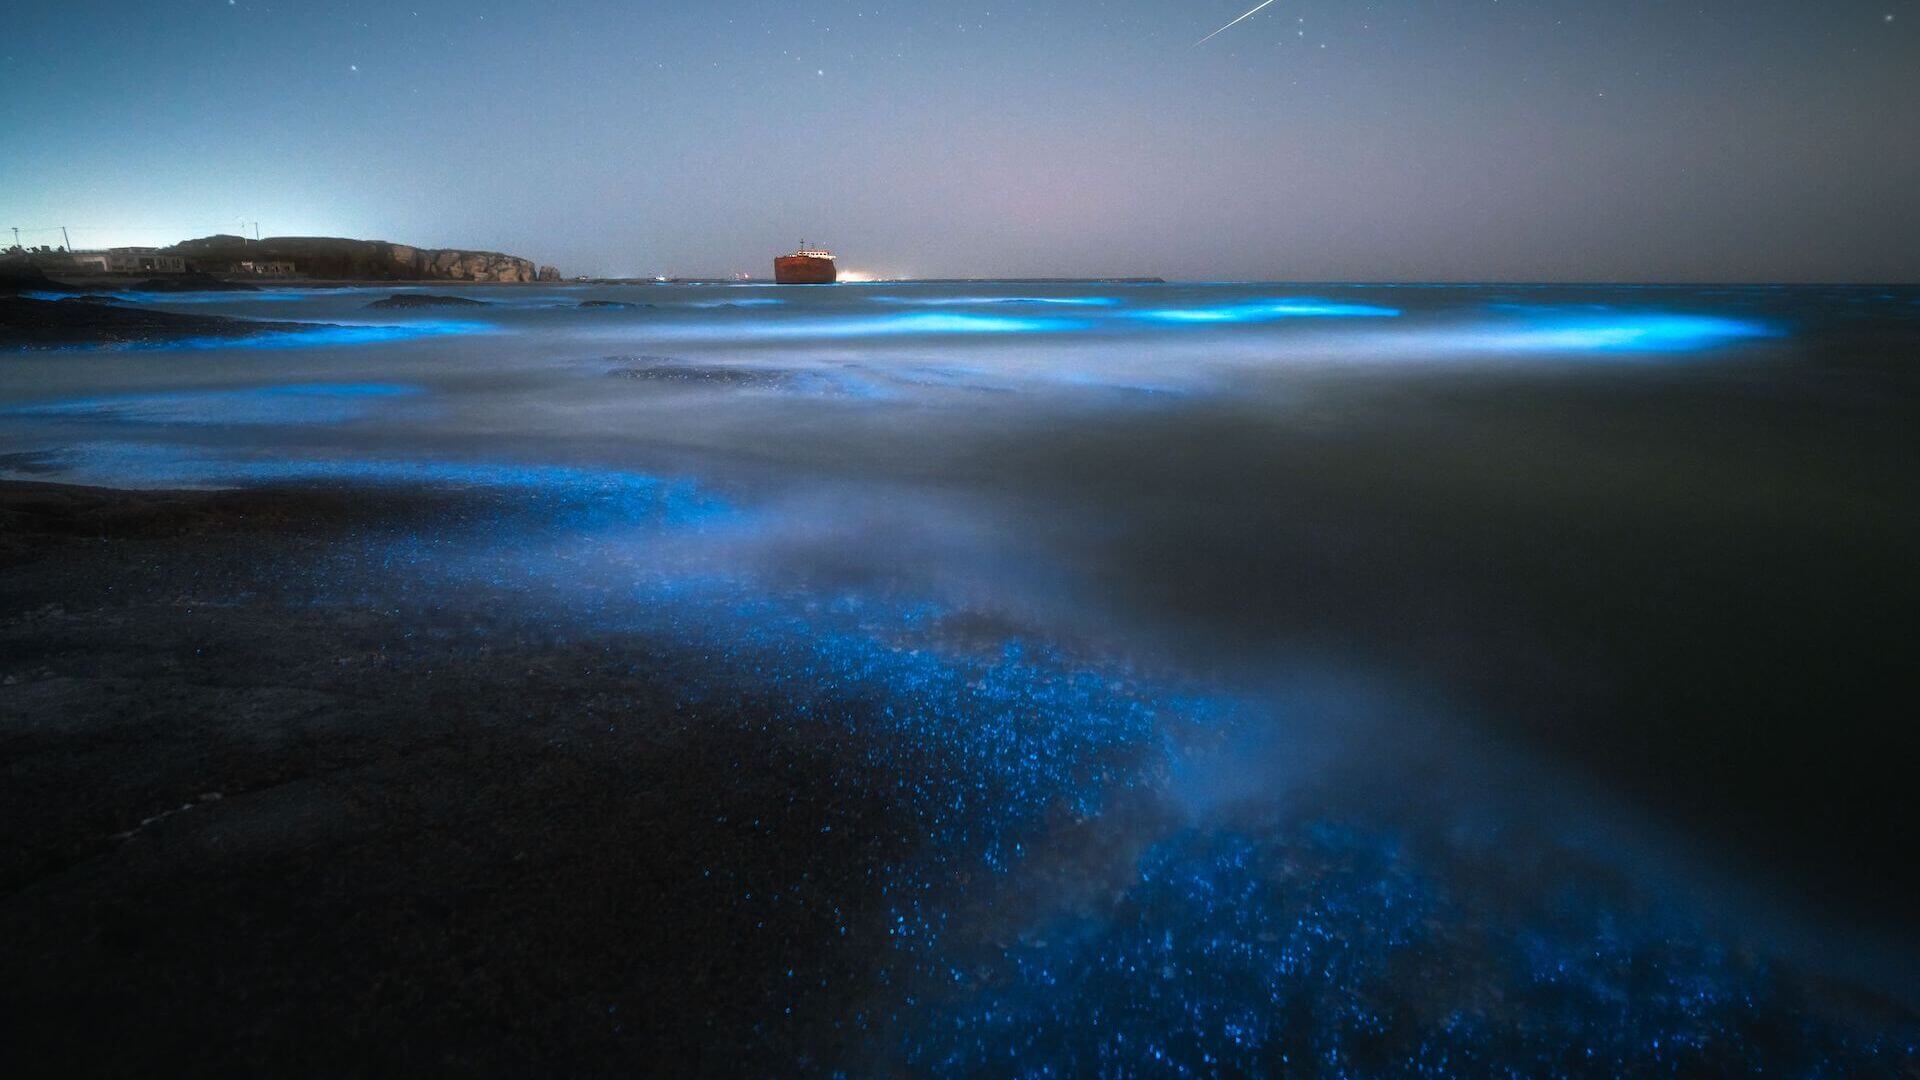 A blue glow on the ocean at night.